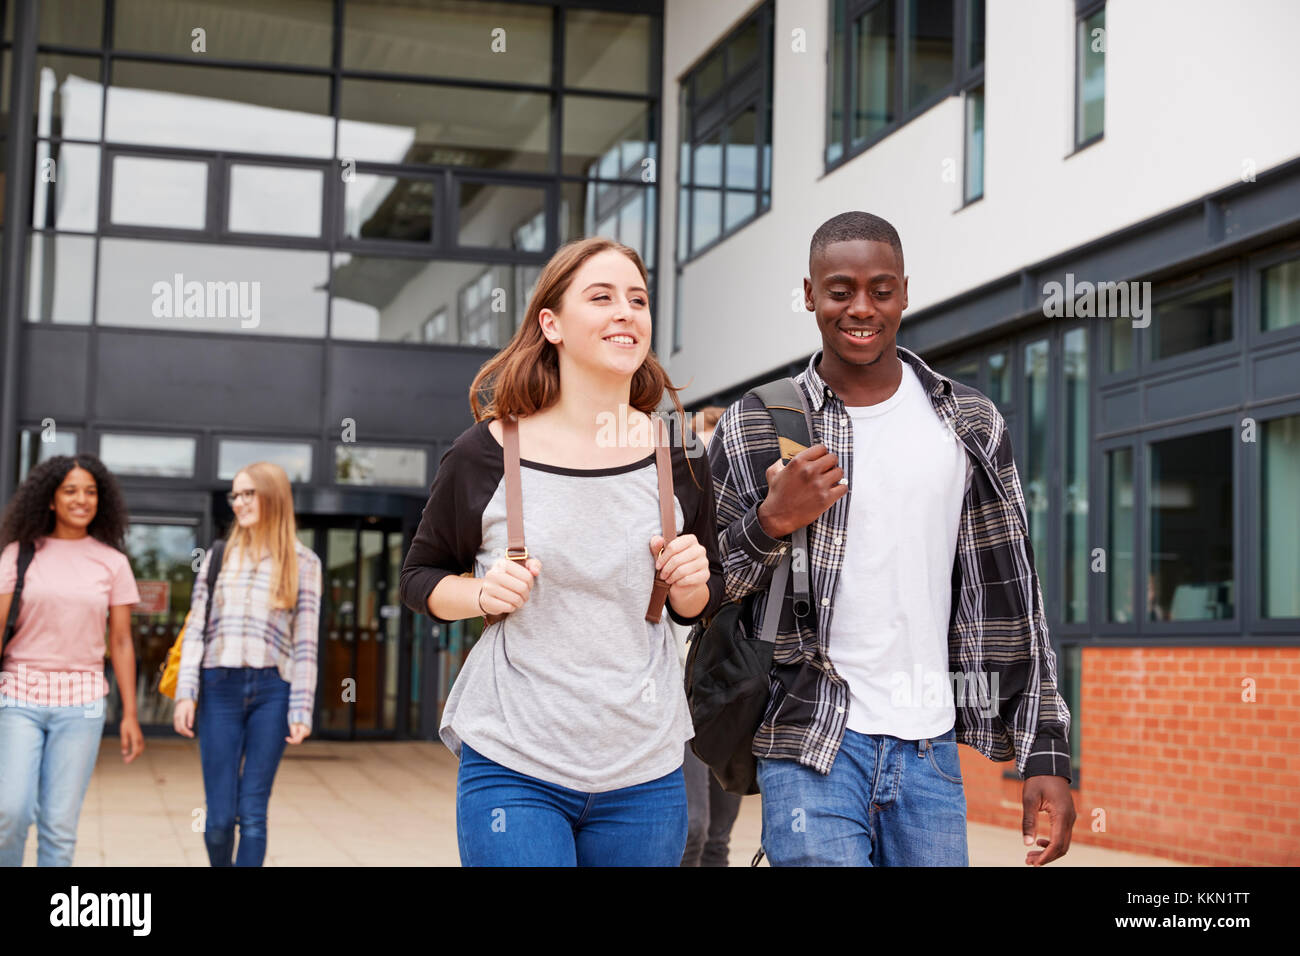 Group Of Students Walking Outside College Buildings Stock Photo